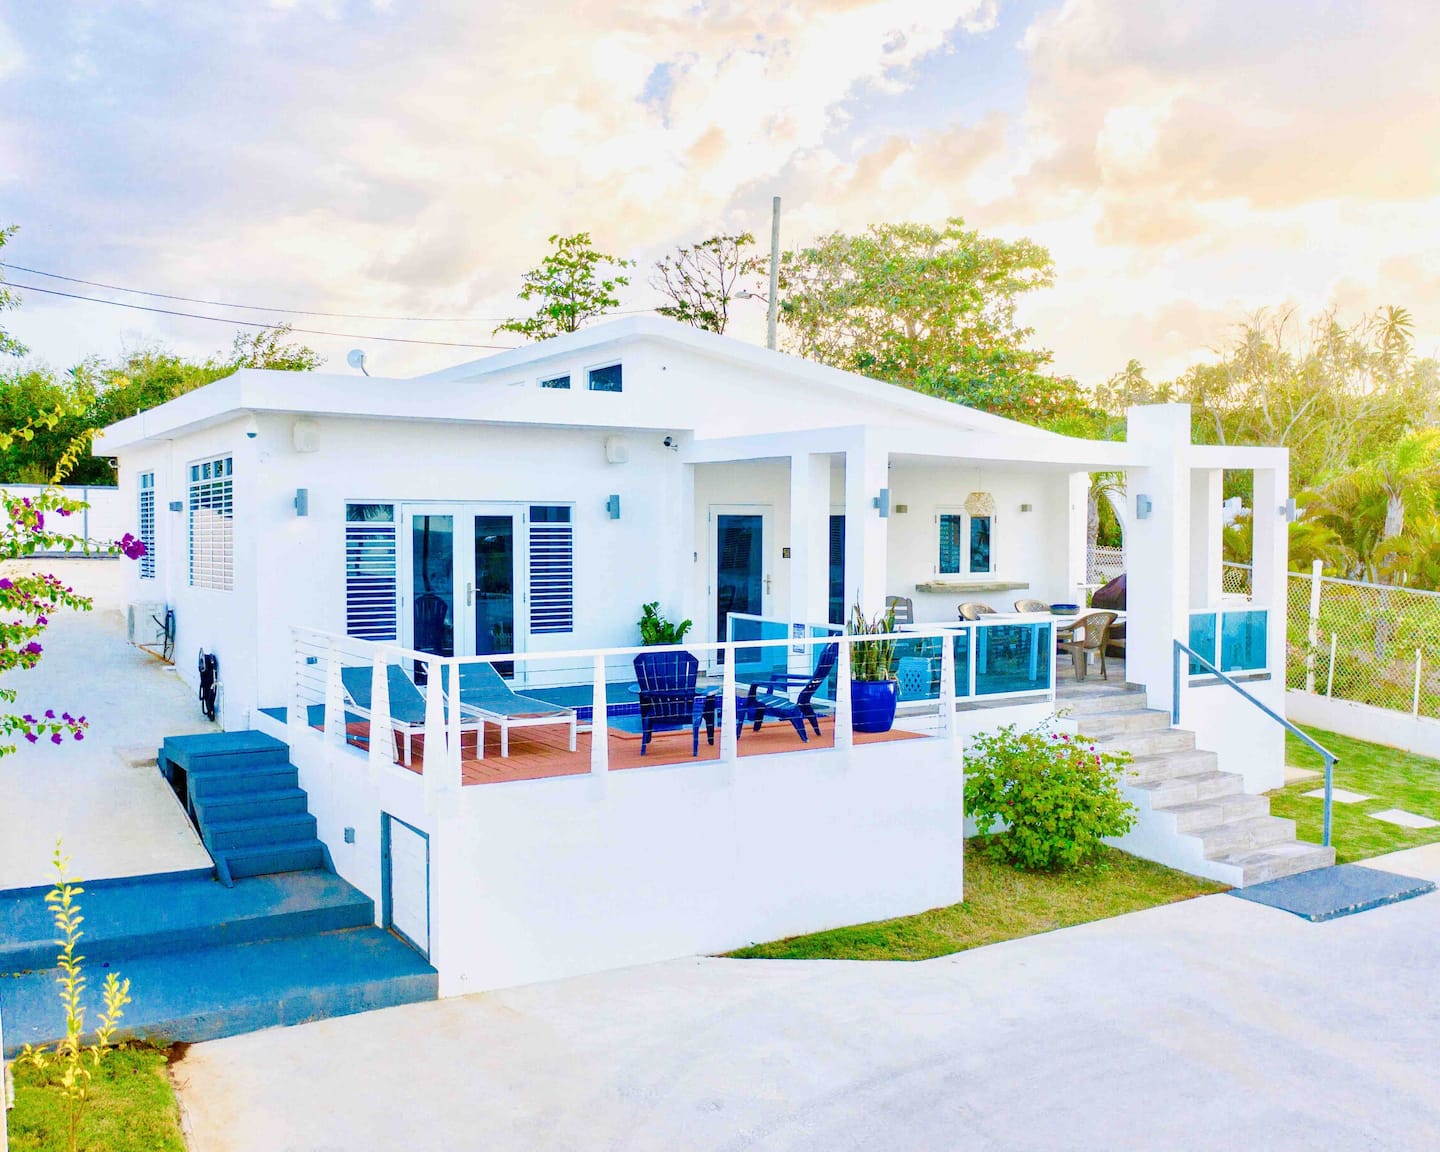 Modern Villa Despacito, one of the best Airbnb Stays in Puerto Rico